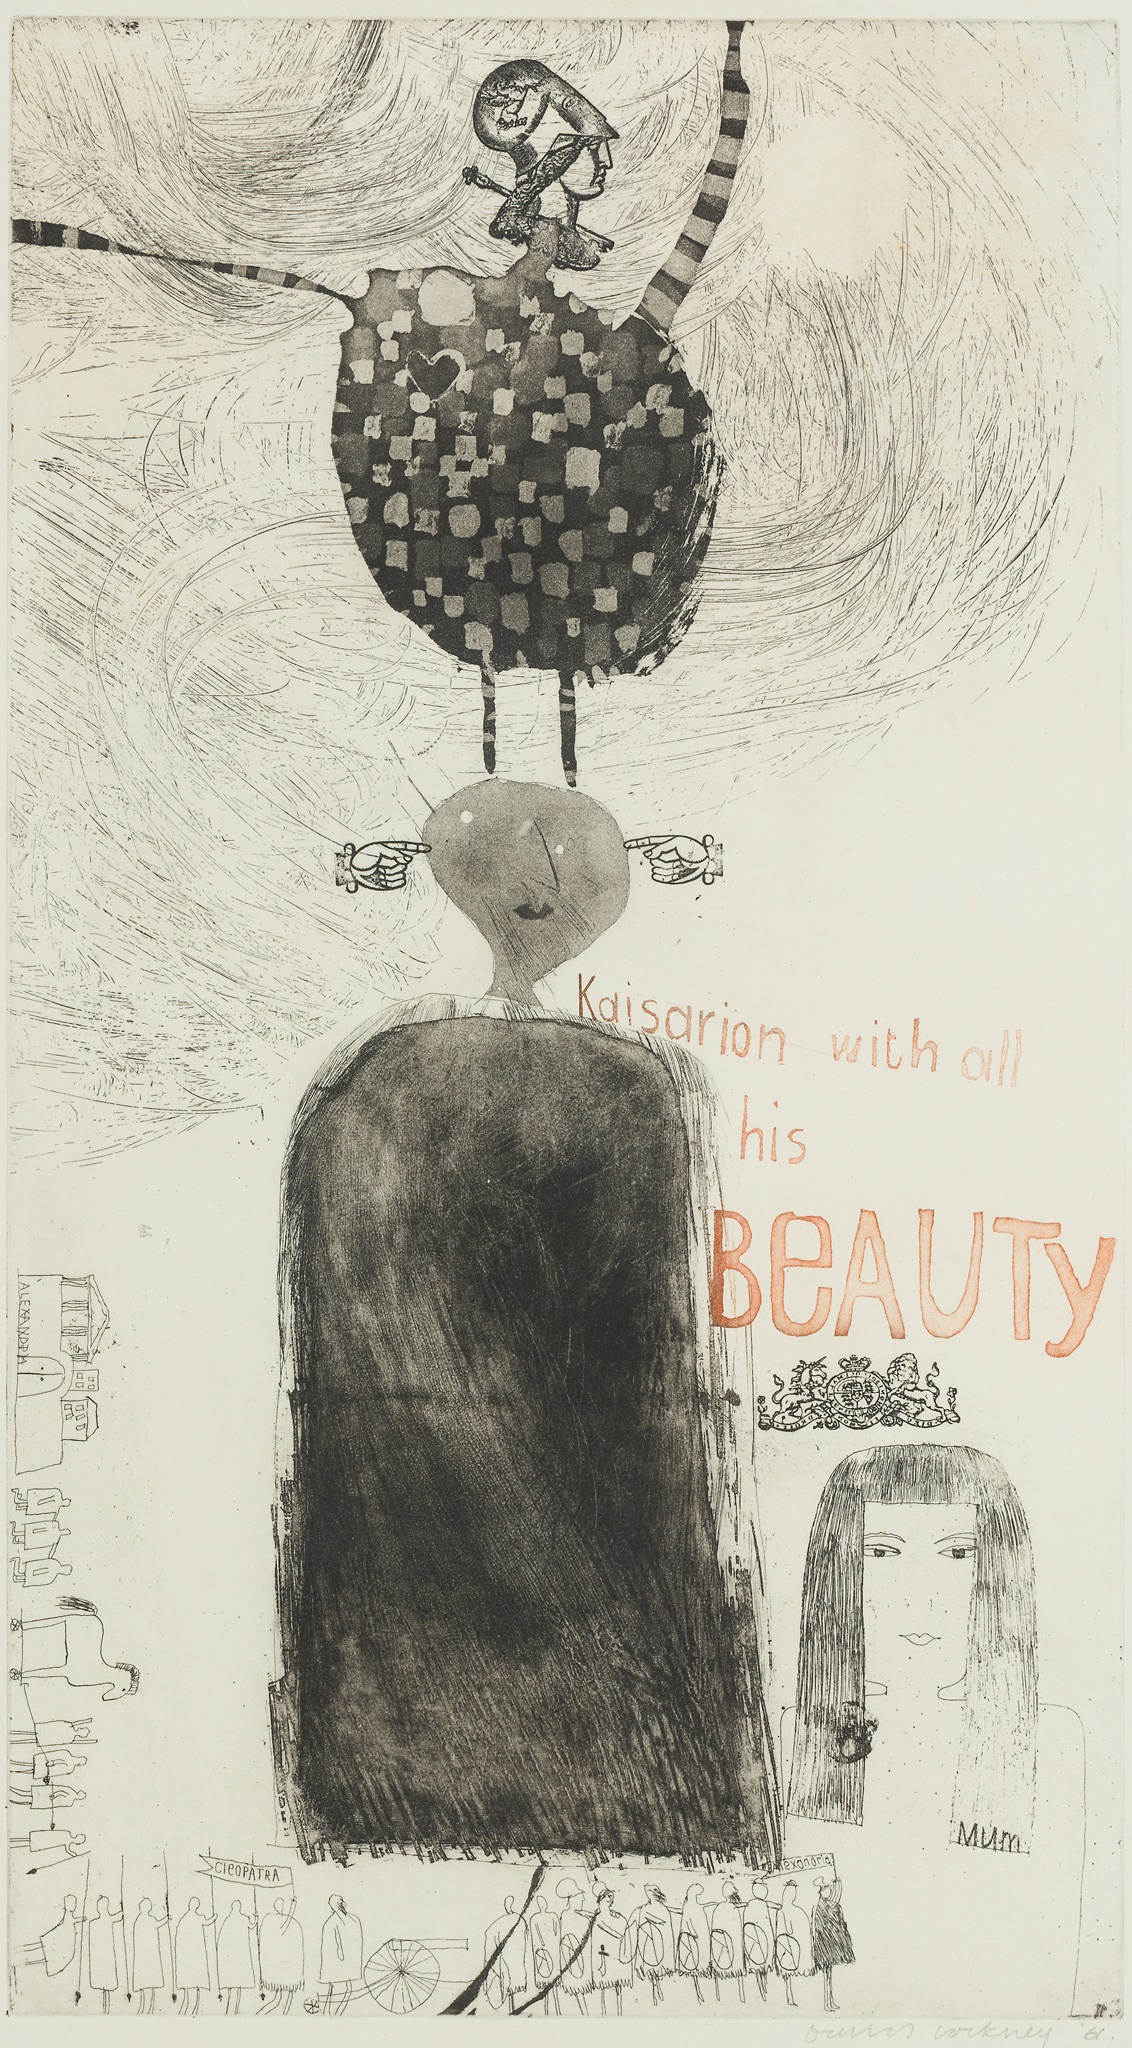 LOT 184 | § DAVID HOCKNEY O.M., C.H., R.A. (BRITISH 1937-) | KAISARION AND ALL HIS BEAUTY - 1961 | £7,000 - £9,000 + fees